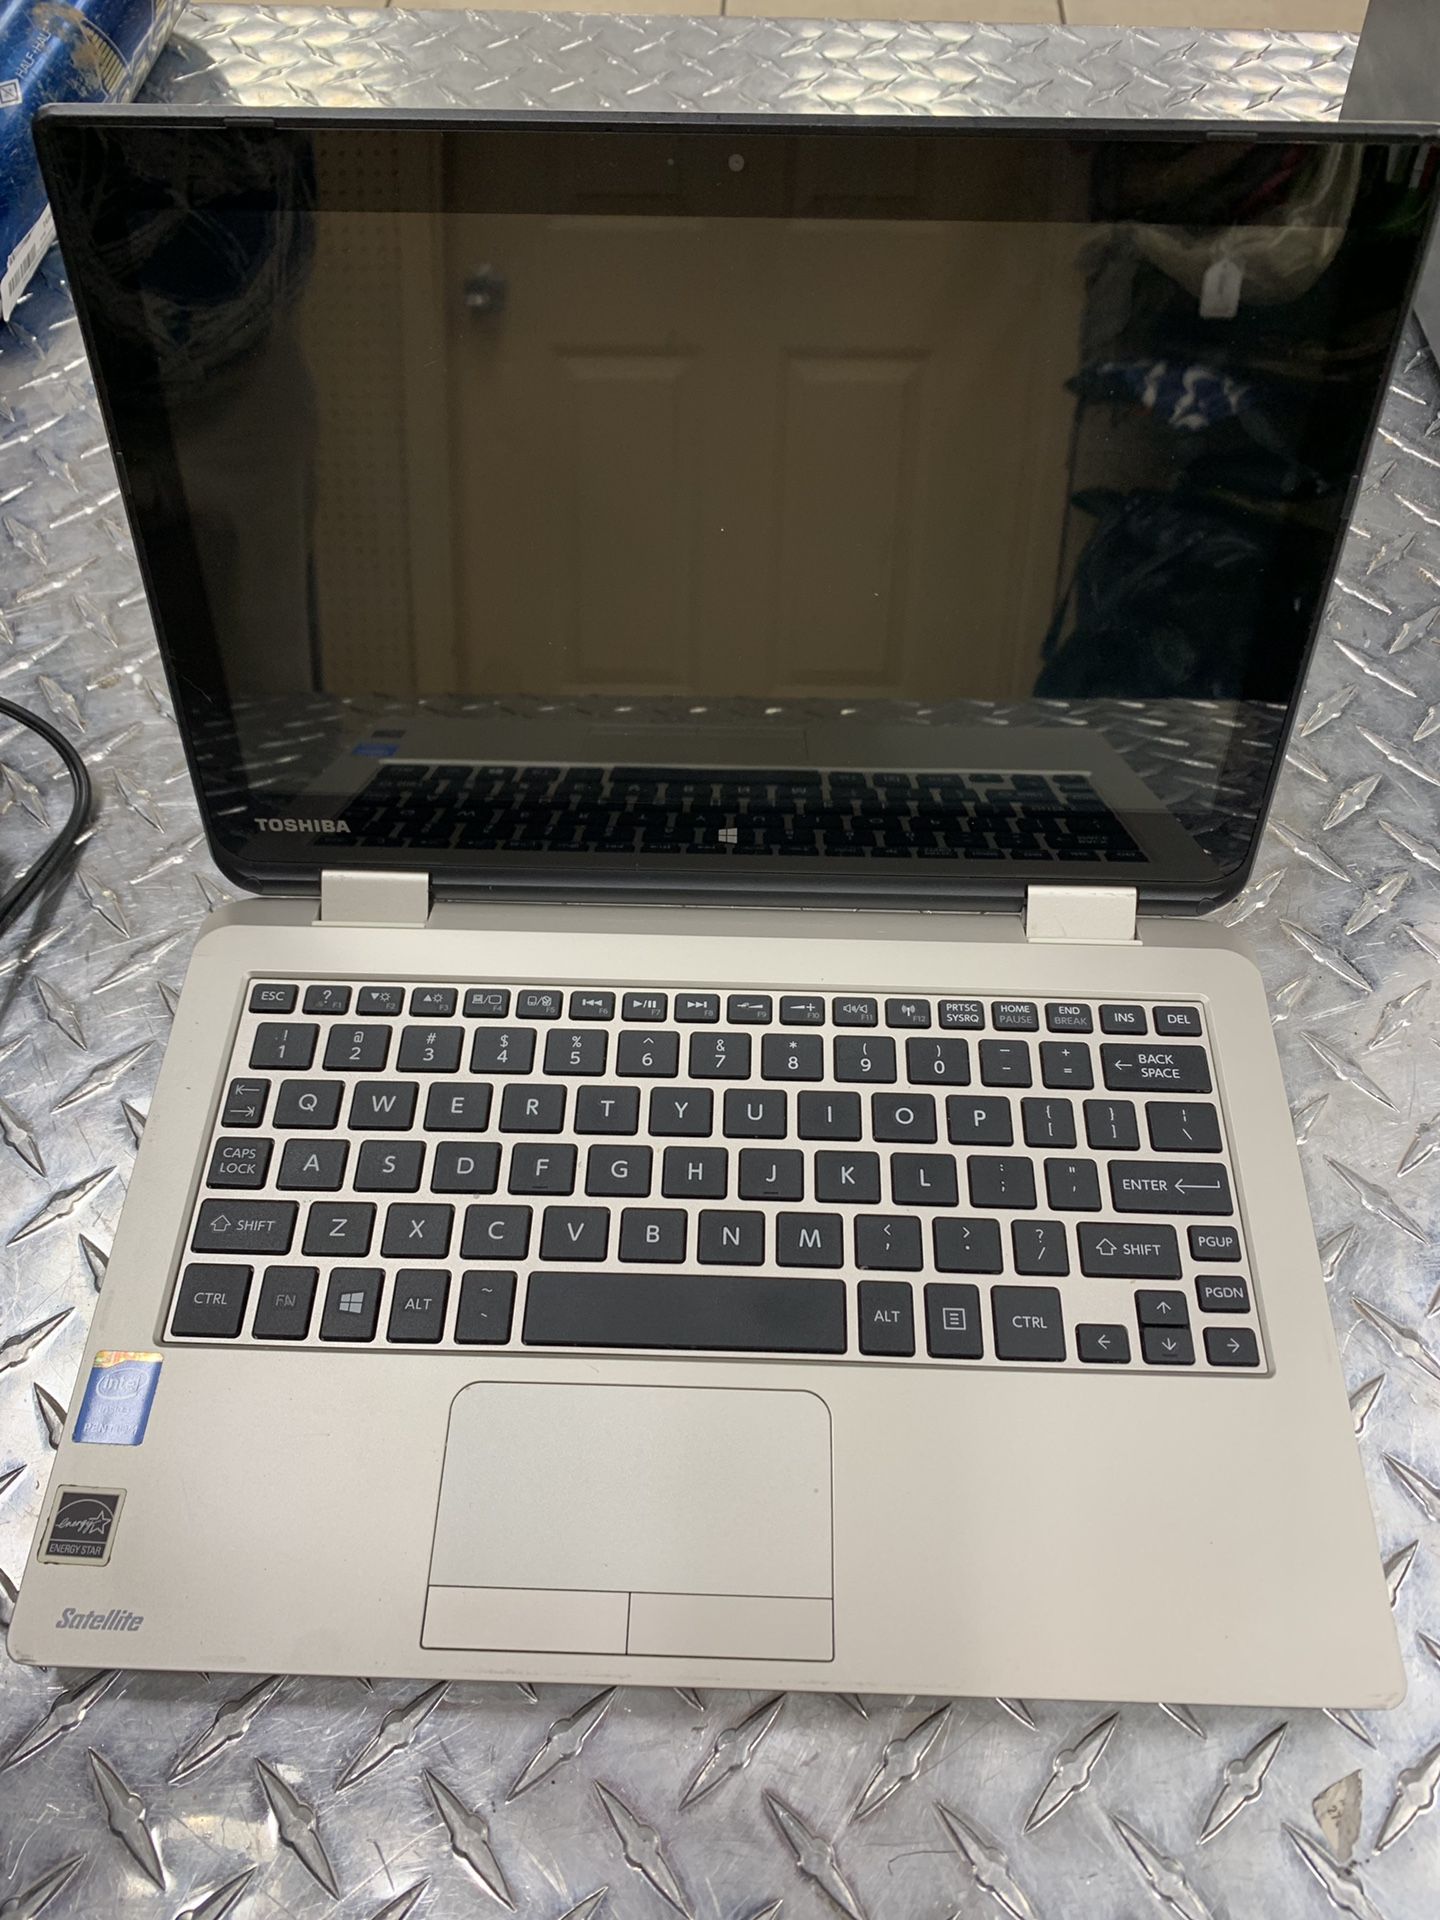 Toshiba reversible laptop with charger